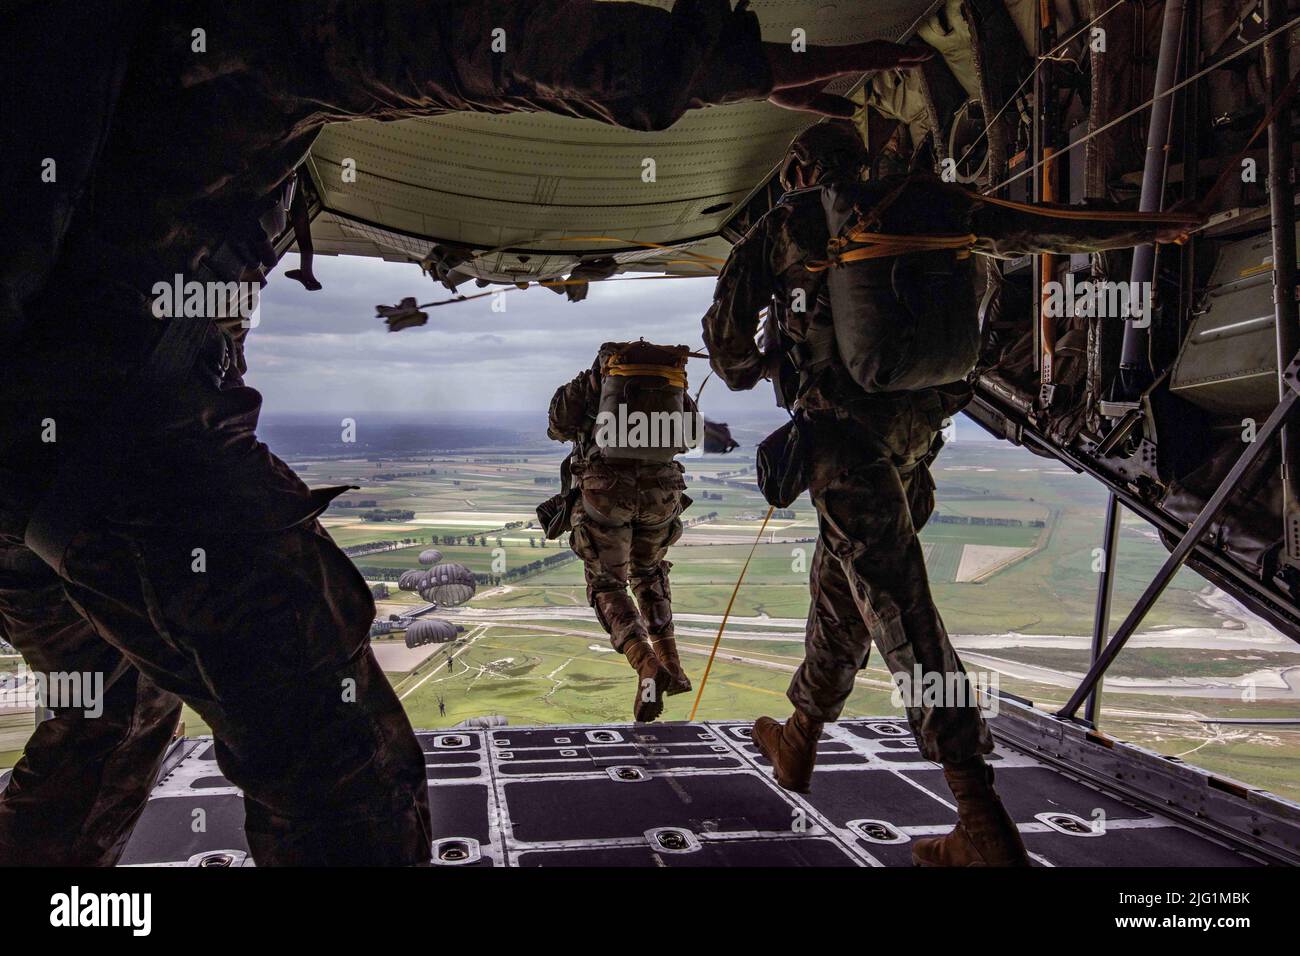 France. 9th June, 2022. U.S. Army Special Operations service members consisting of U.S. Special Operations Command Europe, U.S. Special Operations Command Africa, and 1-10 Special Forces Group jump from the ramp of an Ohio Air National Guard C-130 aircraft during a static line airborne operation above Le Mont Saint Michel, France, June 9, 2022. This airborne operation comes at the collaboration of French and U.S. allied forces to reinforce strong bonds and clear communication between NATO allies. Credit: Hannah Hawkins/U.S. Army/ZUMA Press Wire Service/ZUMAPRESS.com/Alamy Live News Stock Photo